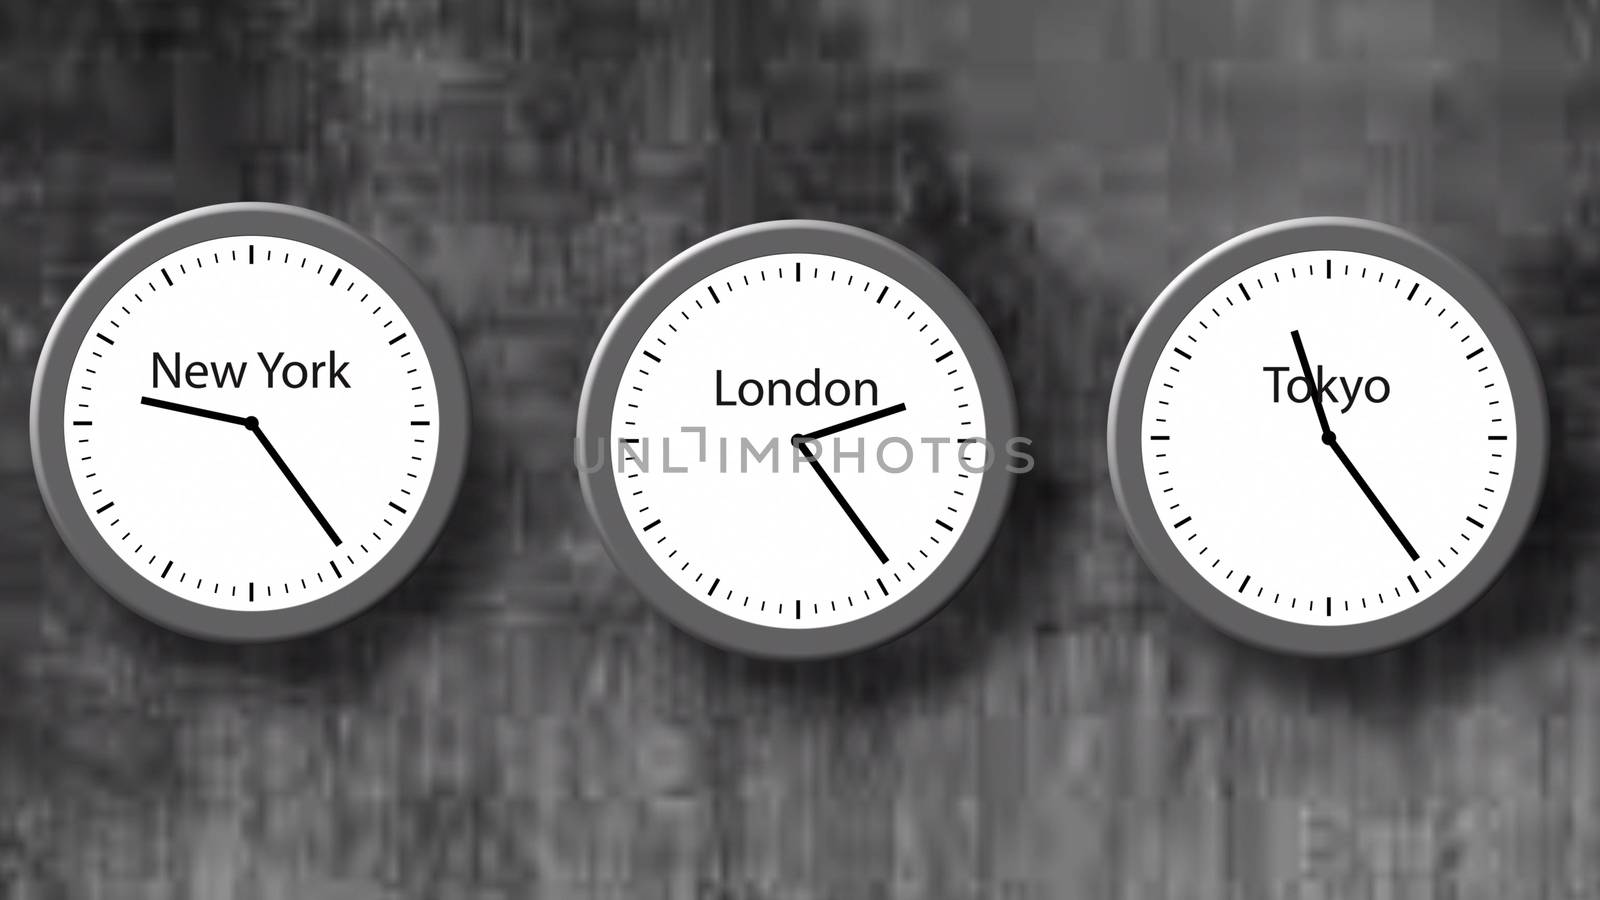 Round clocks showing different time in three cities - London, New York, Tokyo. Illustration of three time zones